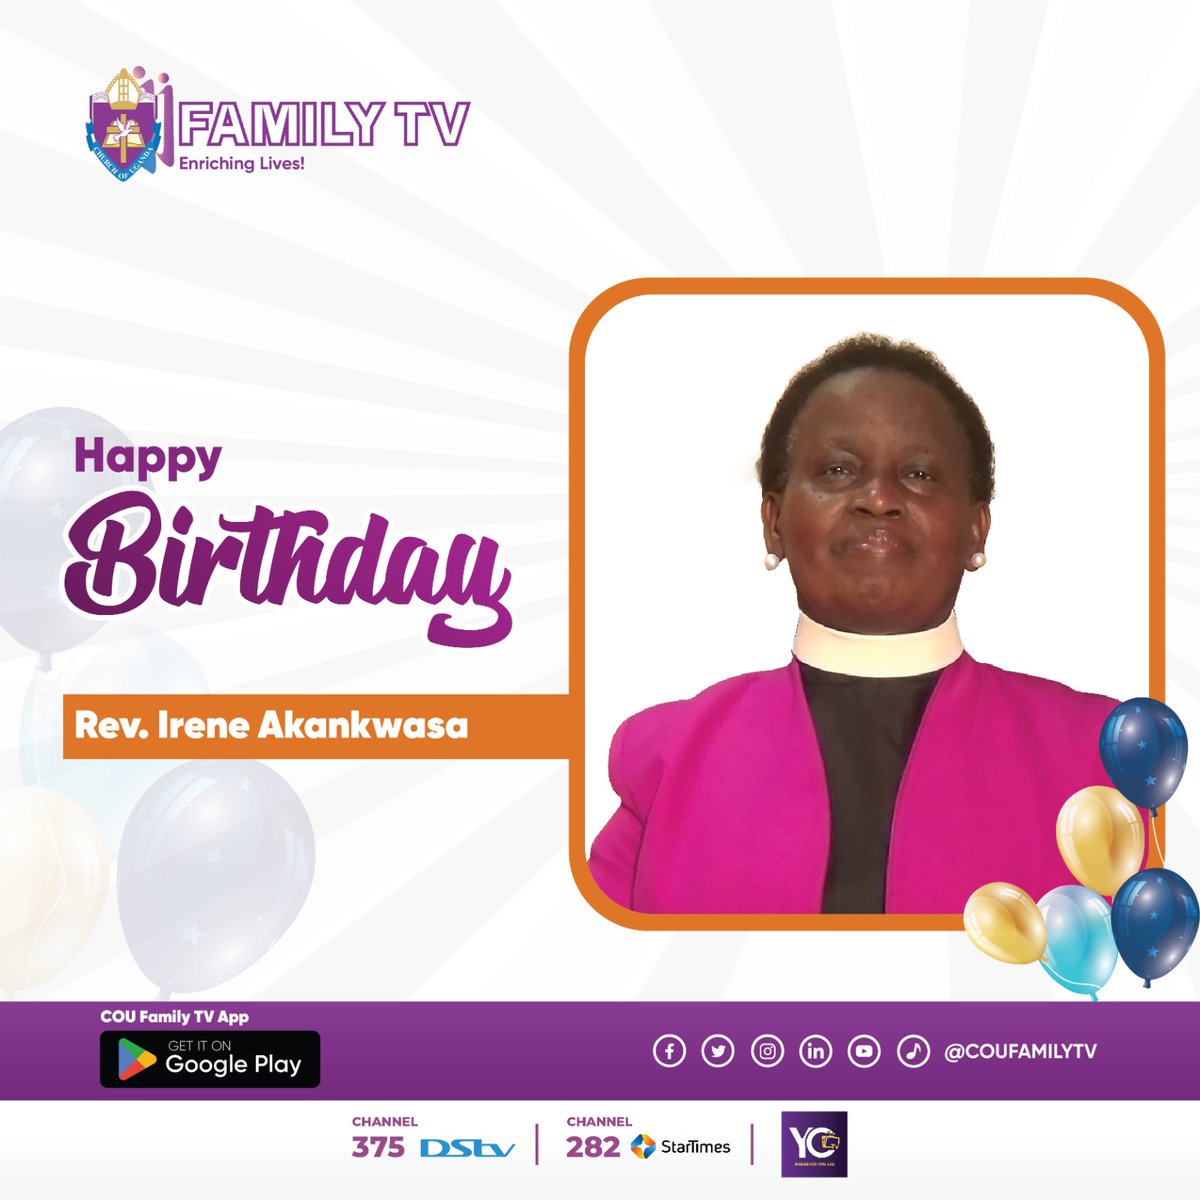 Happy birthday to you Rev. Irene Akankwasa. May your special day be filled with blessings, love, and joy as you continue to inspire and guide others with your faith and wisdom.
#birthdaywishes #EnrichingLives